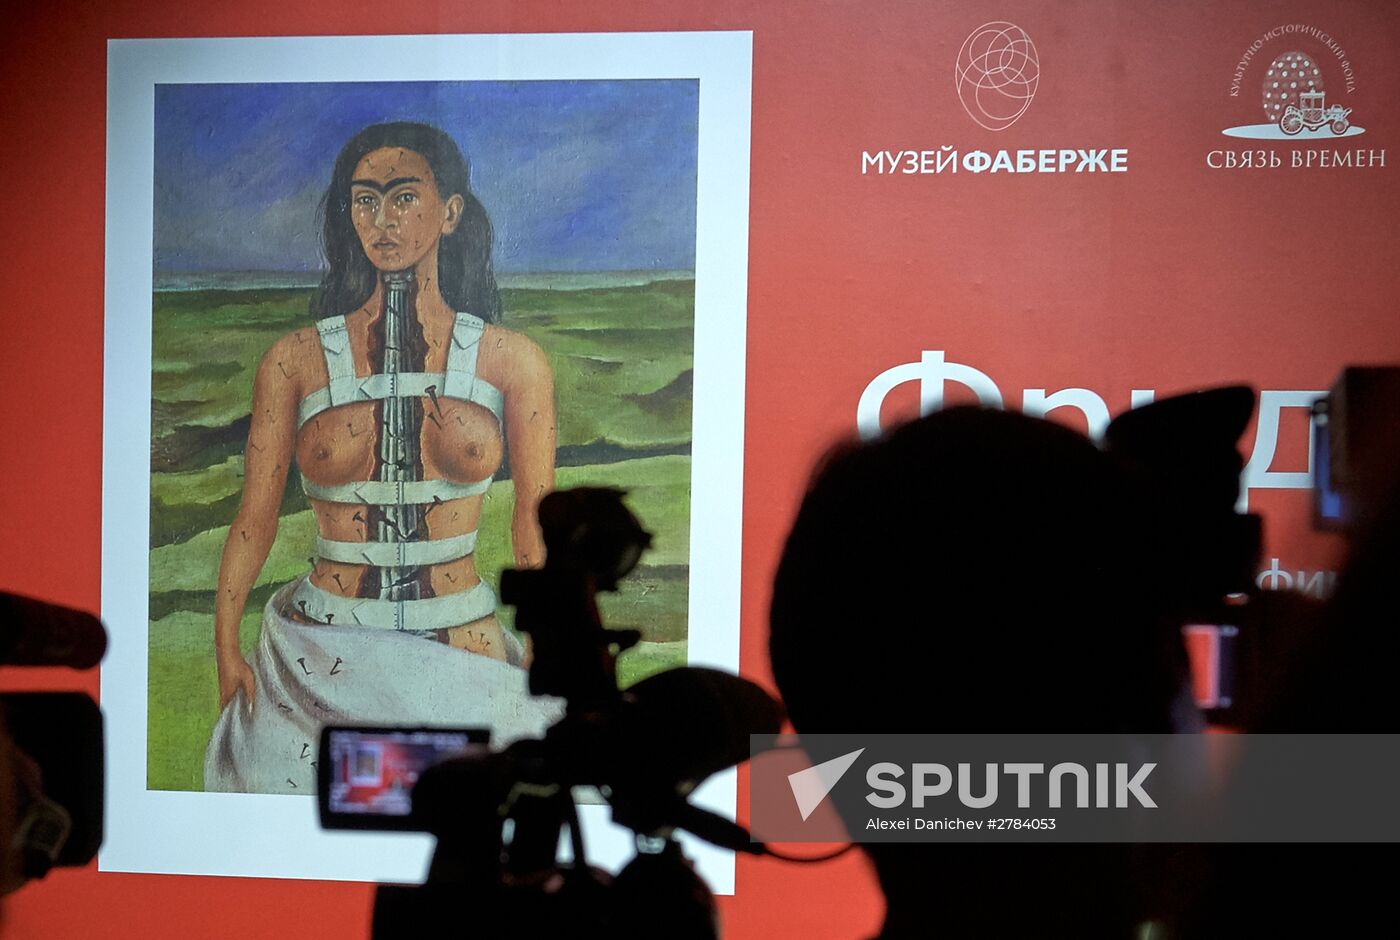 Exhibition "Frida Kahlo. Paintings and Drawings from Collections of Mexico" opens in St.Petersburg